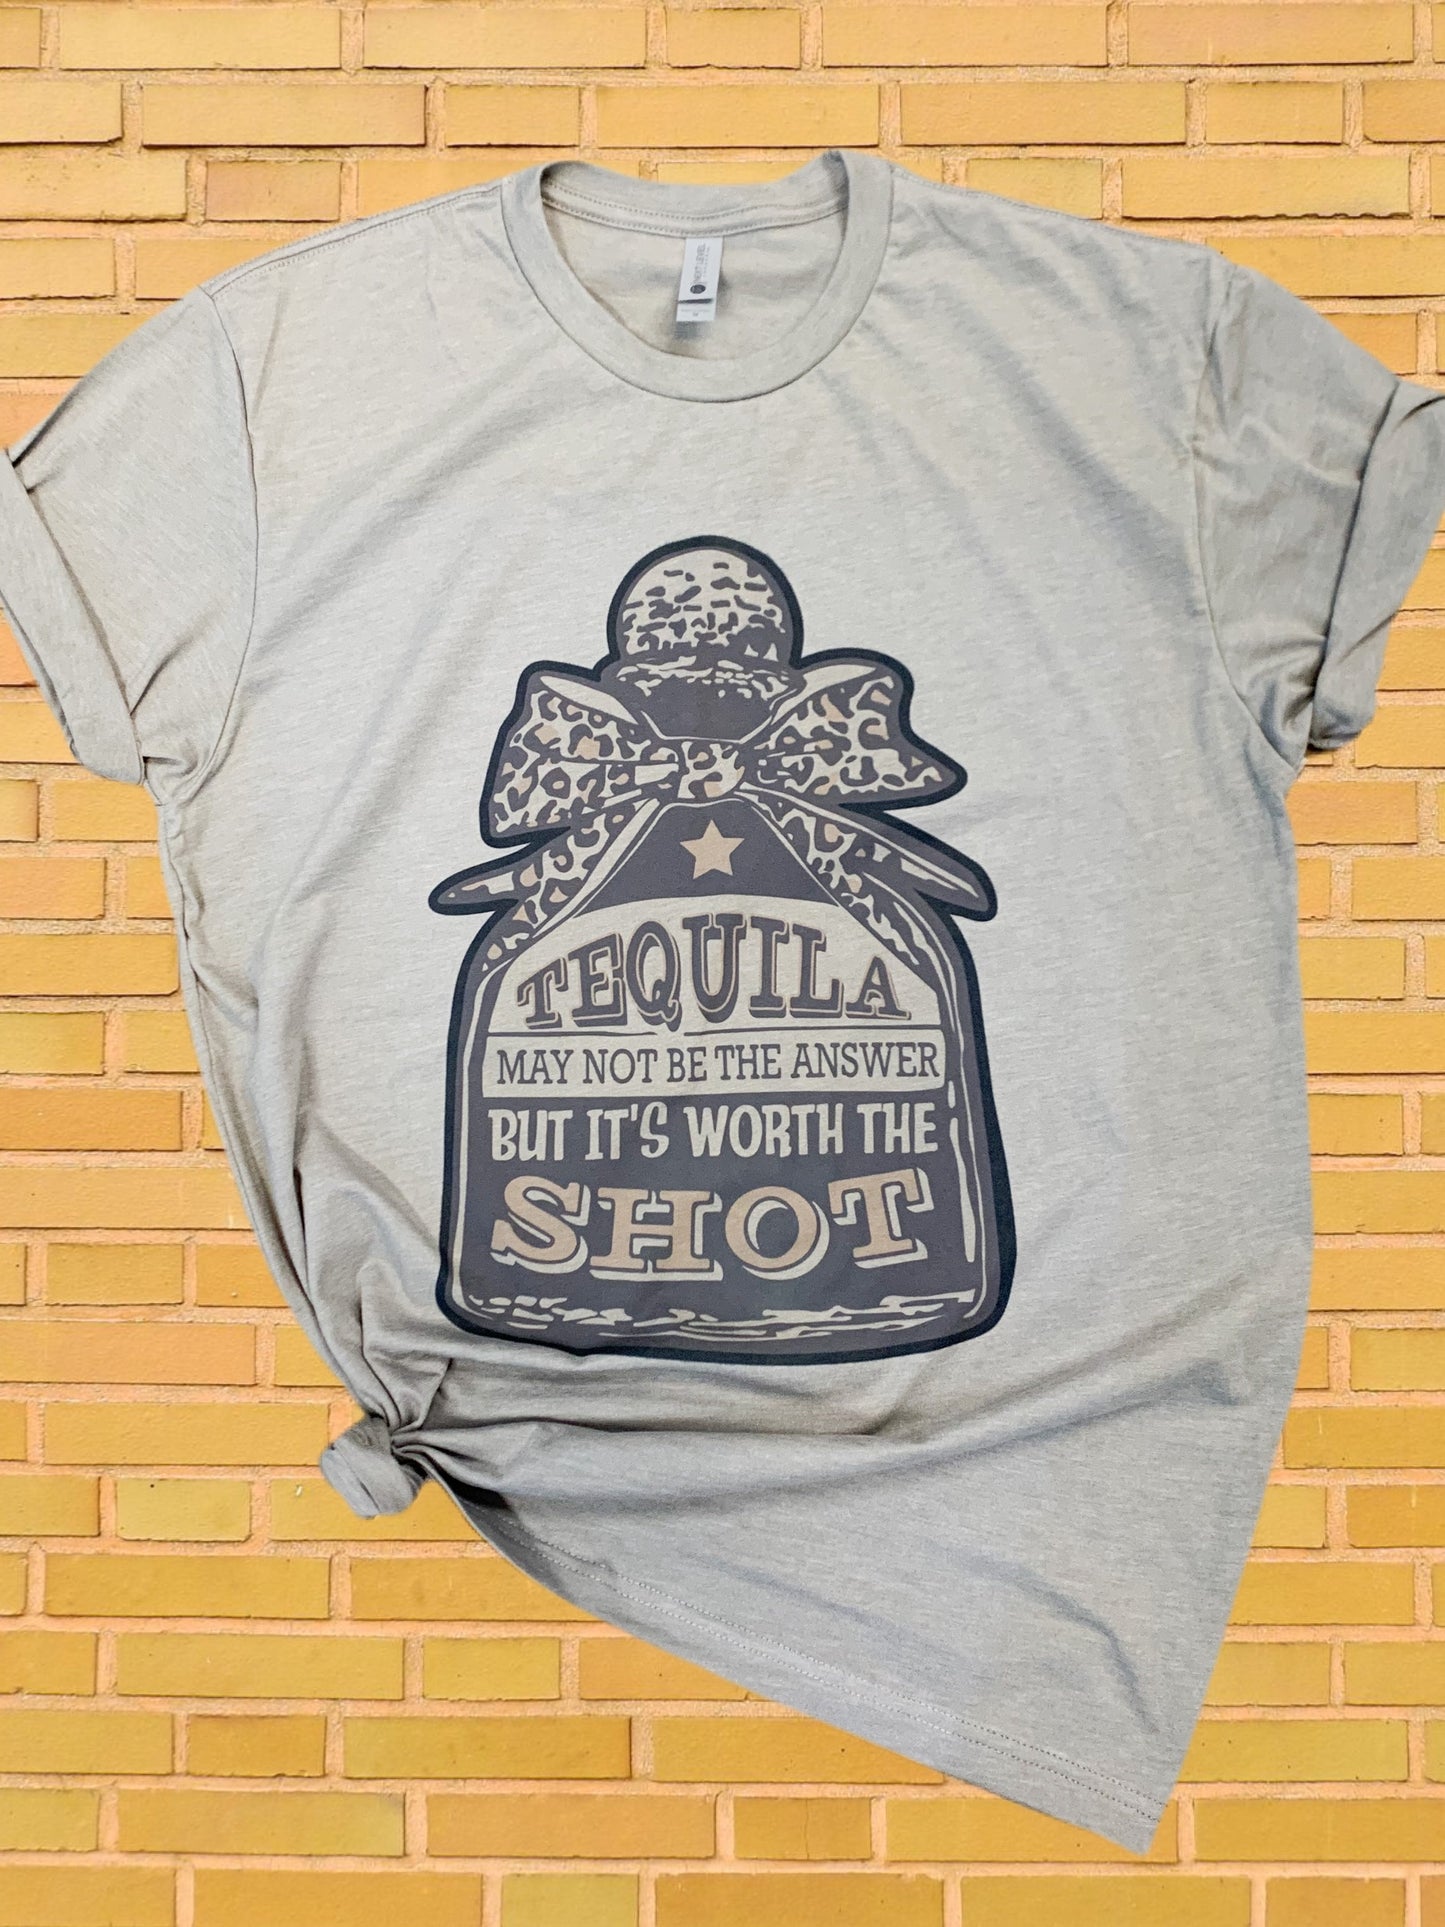 Tequila - It’s Worth the Shot || Permanent Print on Soft T-Shirt